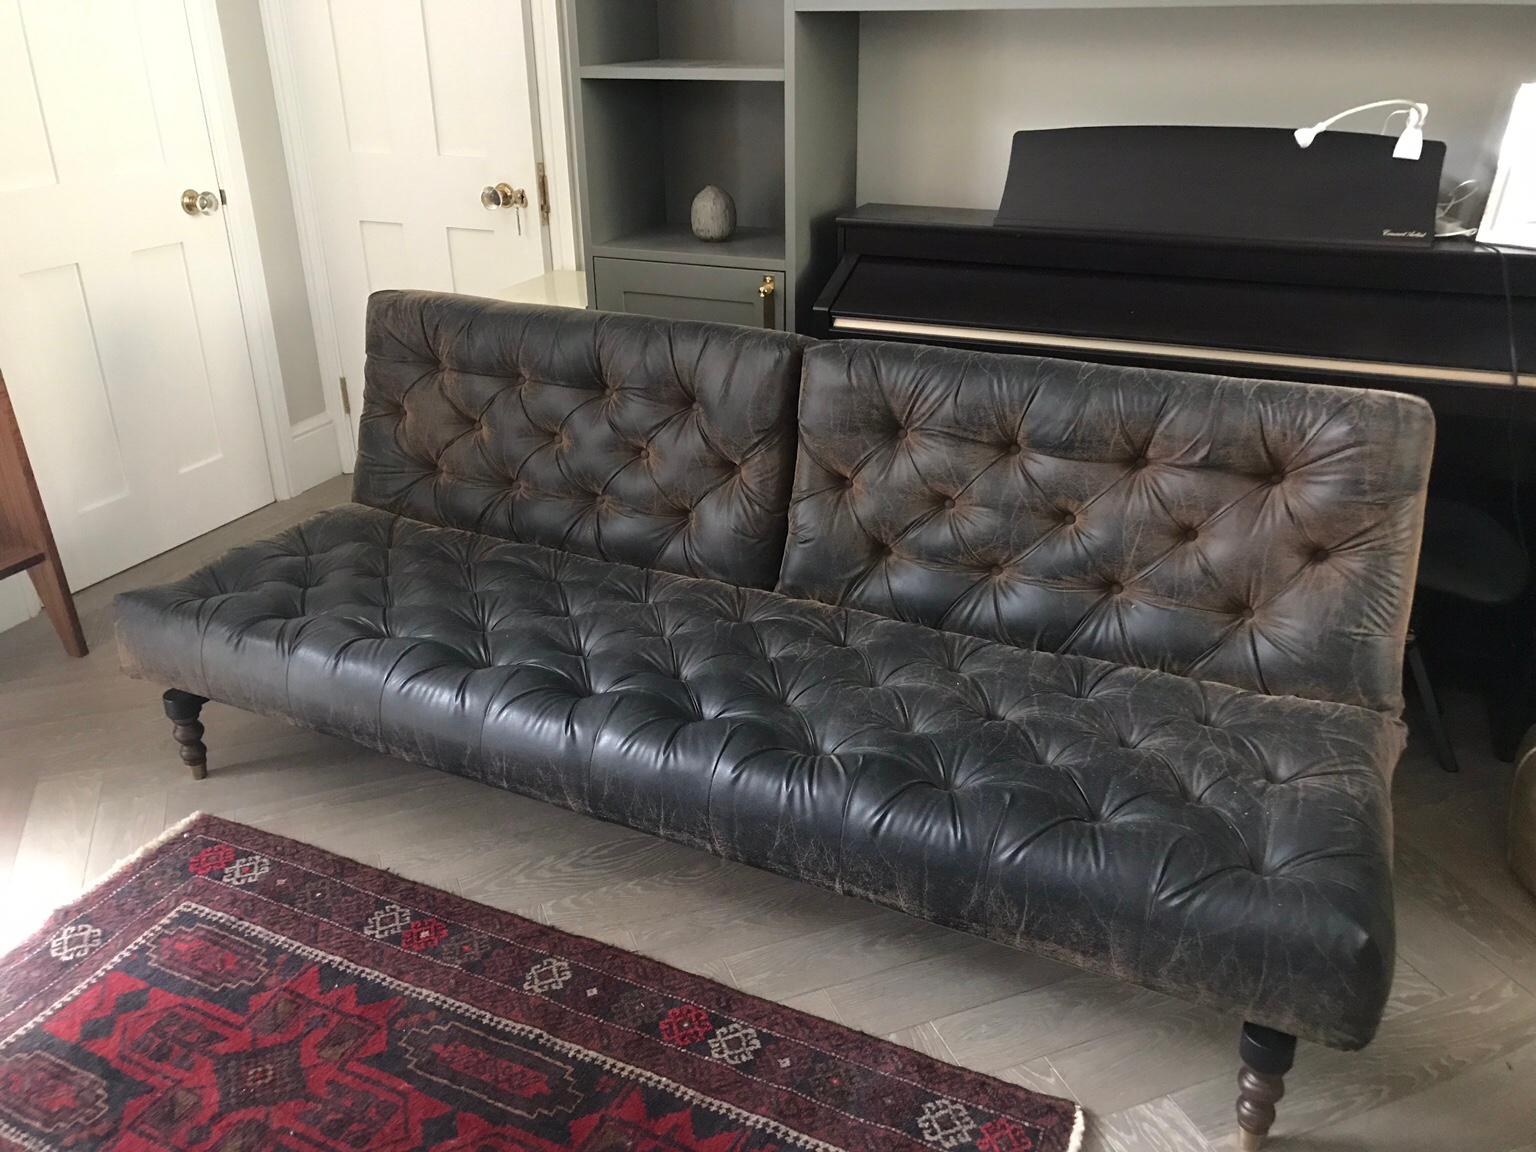 Heals Sofa Bed In Tw9 Thames For 500 00 For Sale Shpock